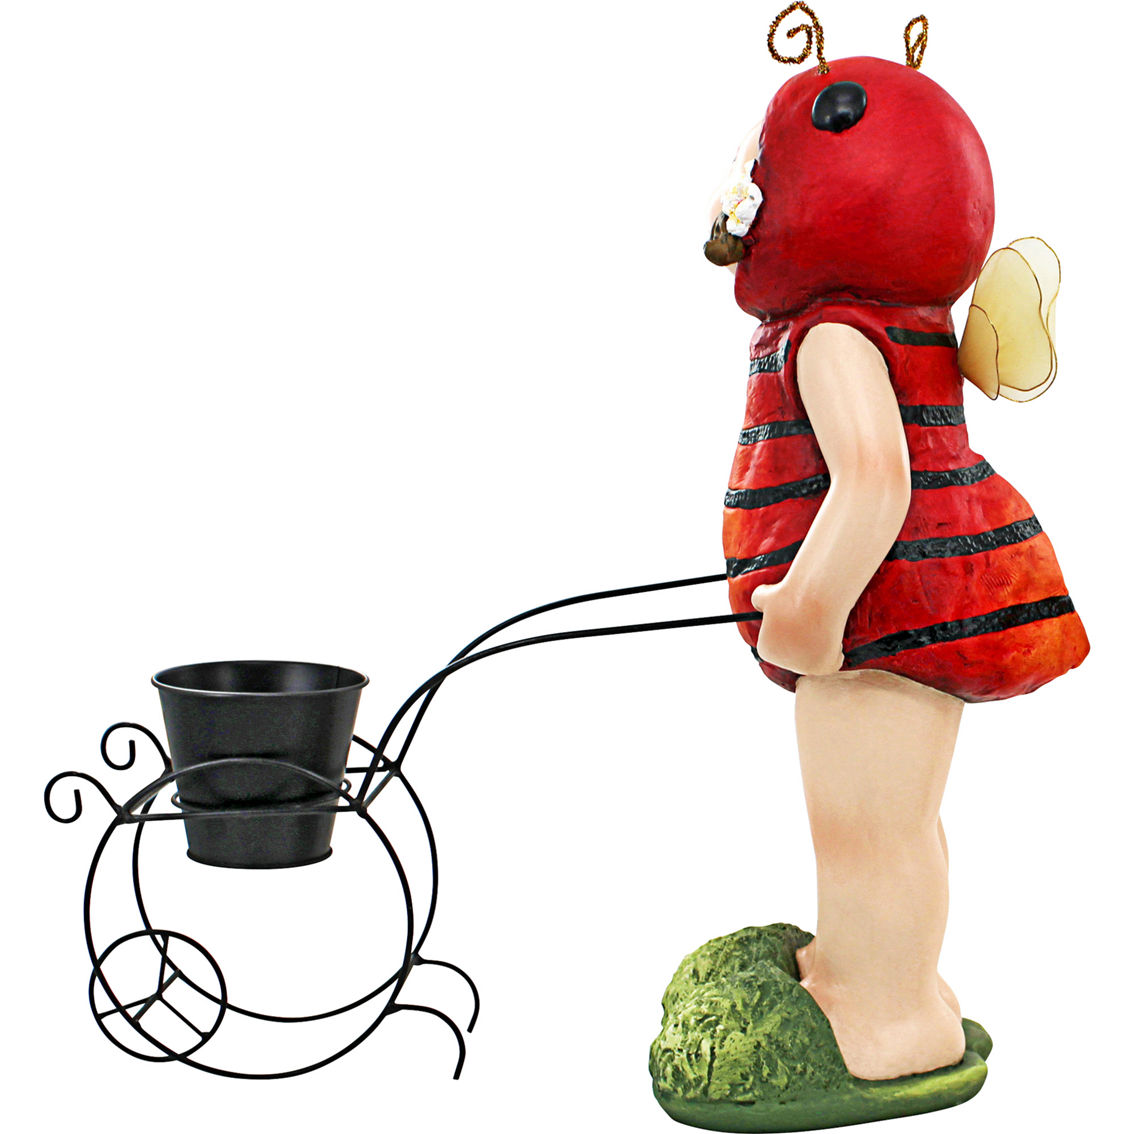 Design Toscano Polly the Lady Bug Fairy Statue - Image 5 of 8